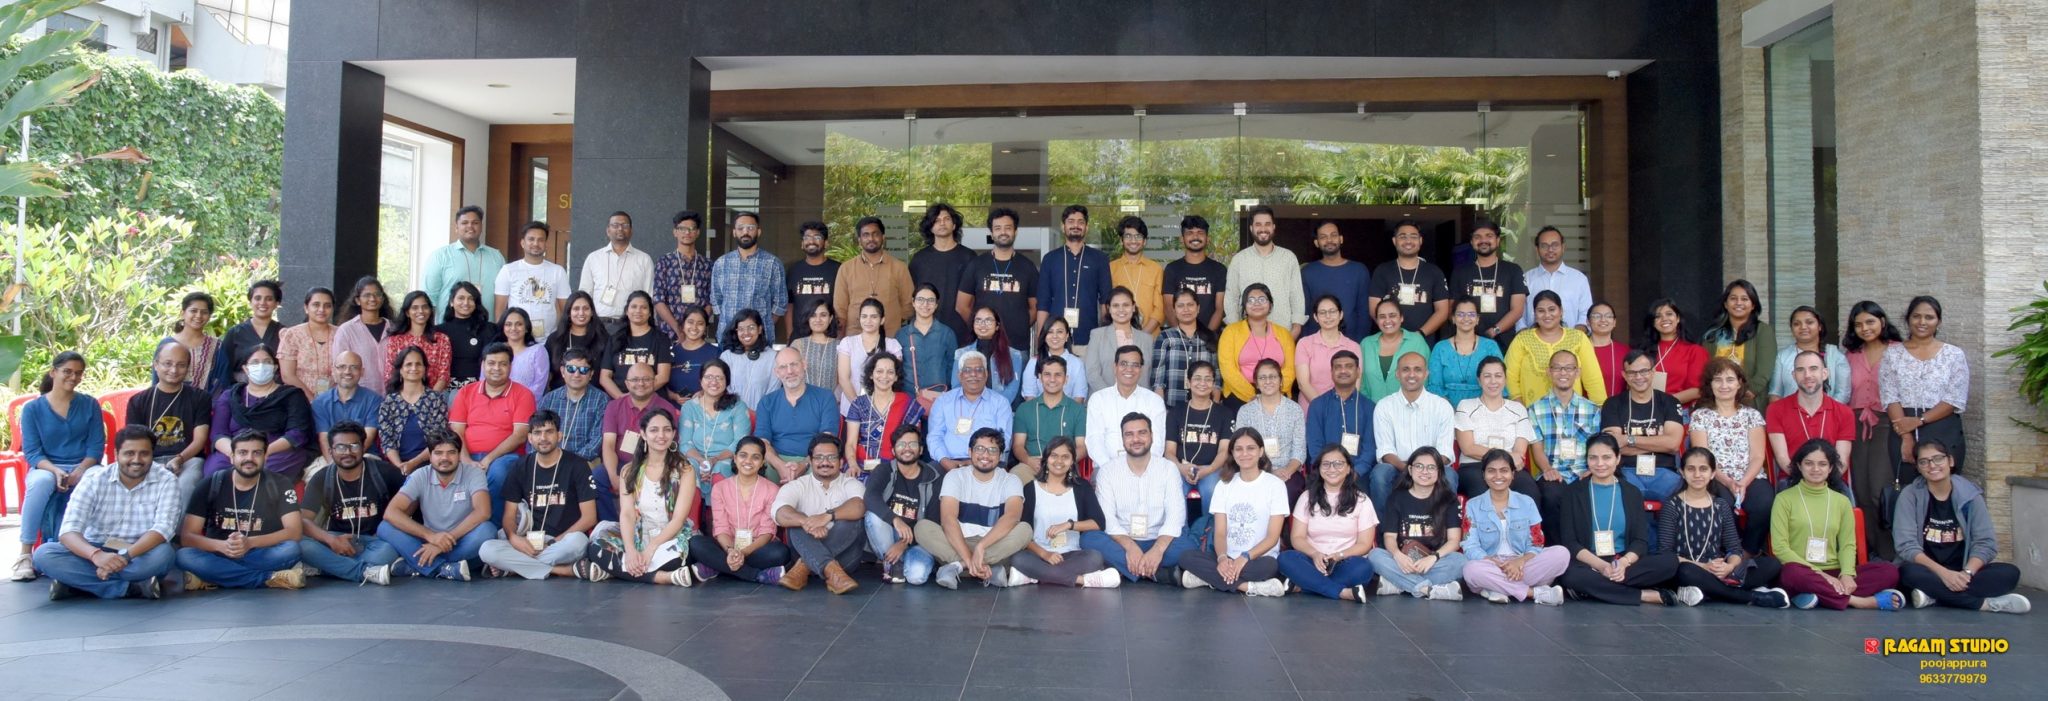 The Indian C. elegans Meeting goes green The Company of Biologists